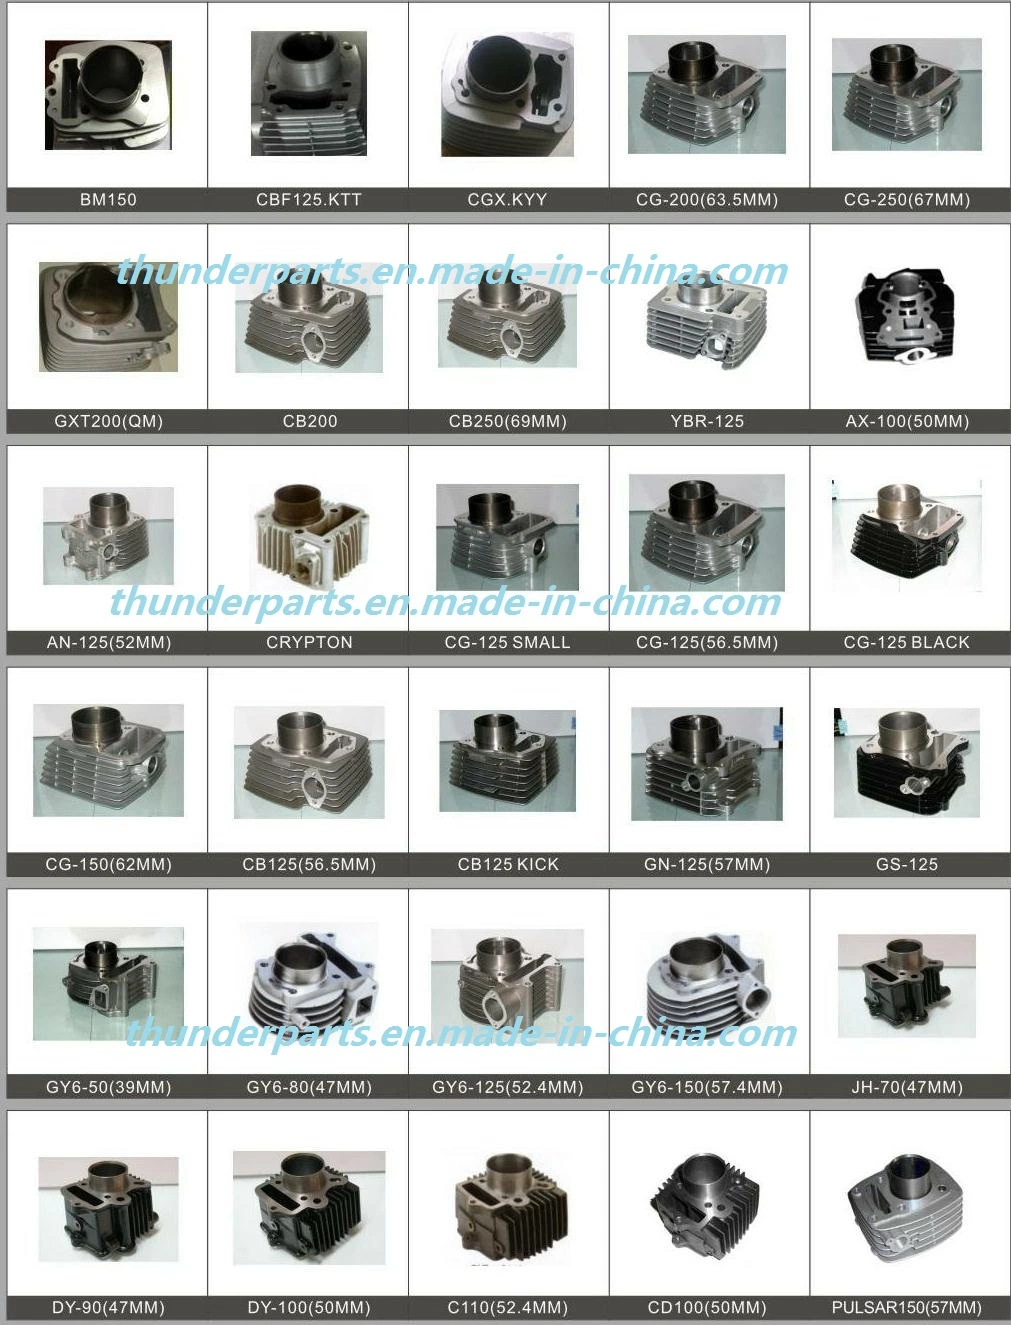 Quality Parts for Motorcycles/Scooters/Tricycles From 50cc to 250cc for Latin America and Africa